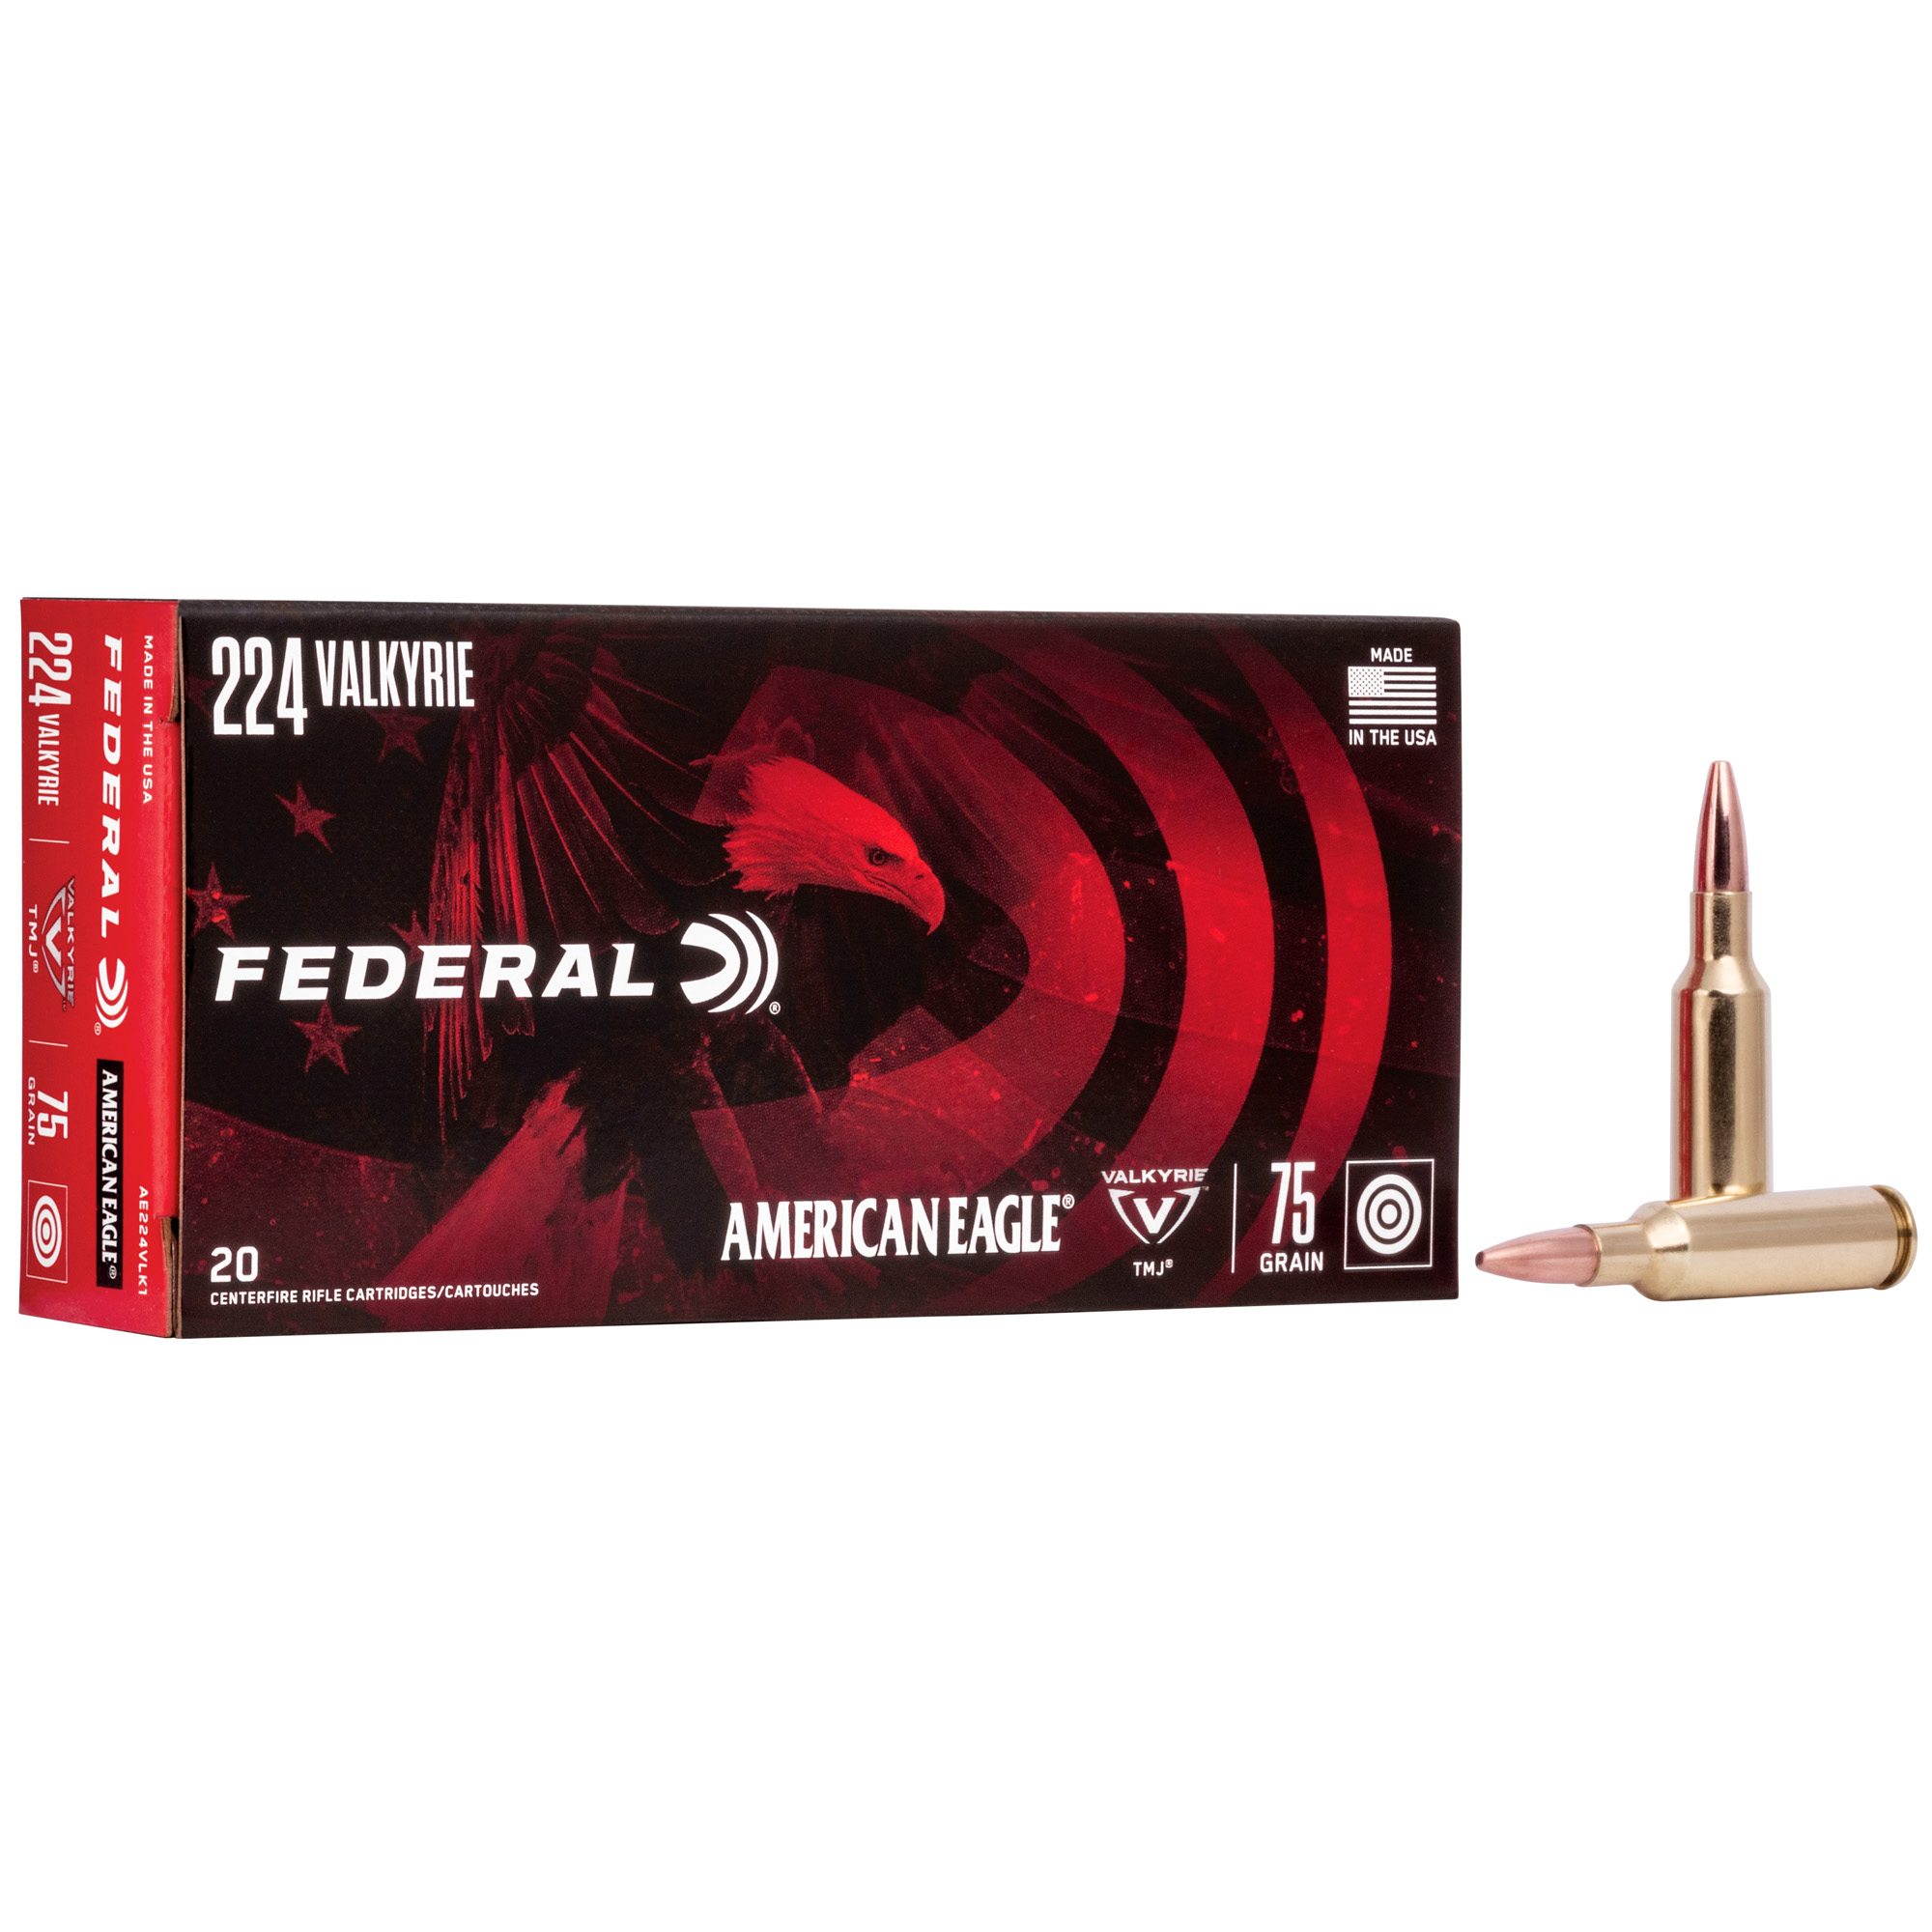 Ammo Federal American Eagle 224 Valkyrie, 75 Grain, Total Metal Jacket, 20 Round Box